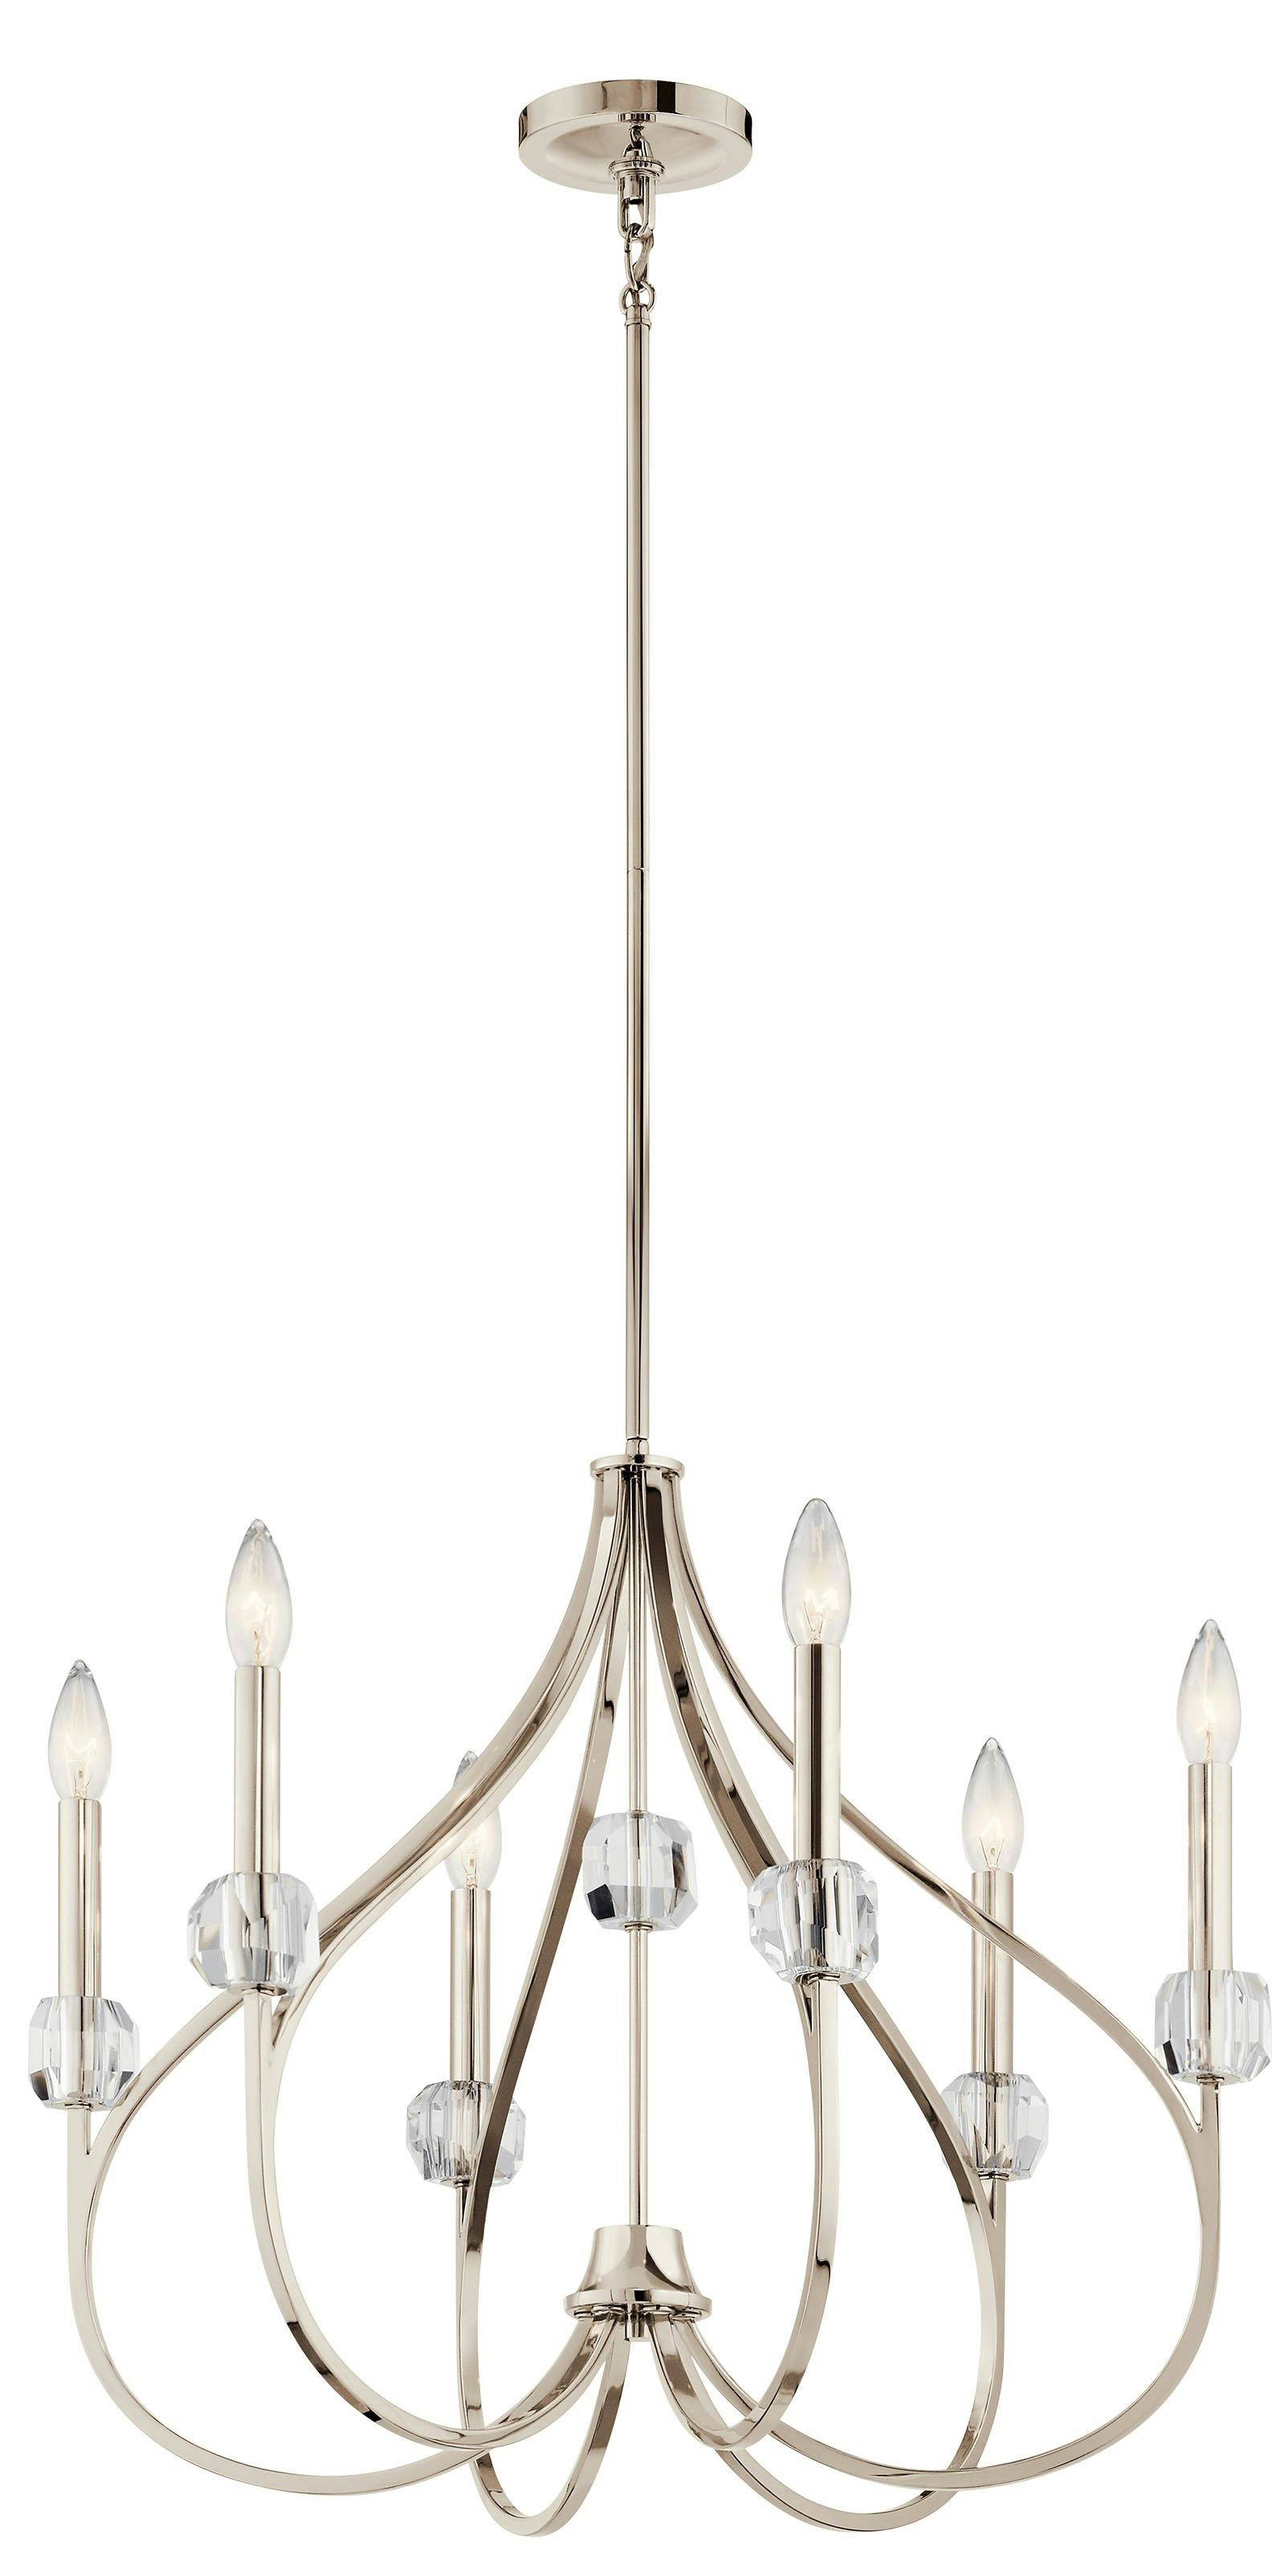 Eloise 6 Light Chandelier Polished Nickel on a white background